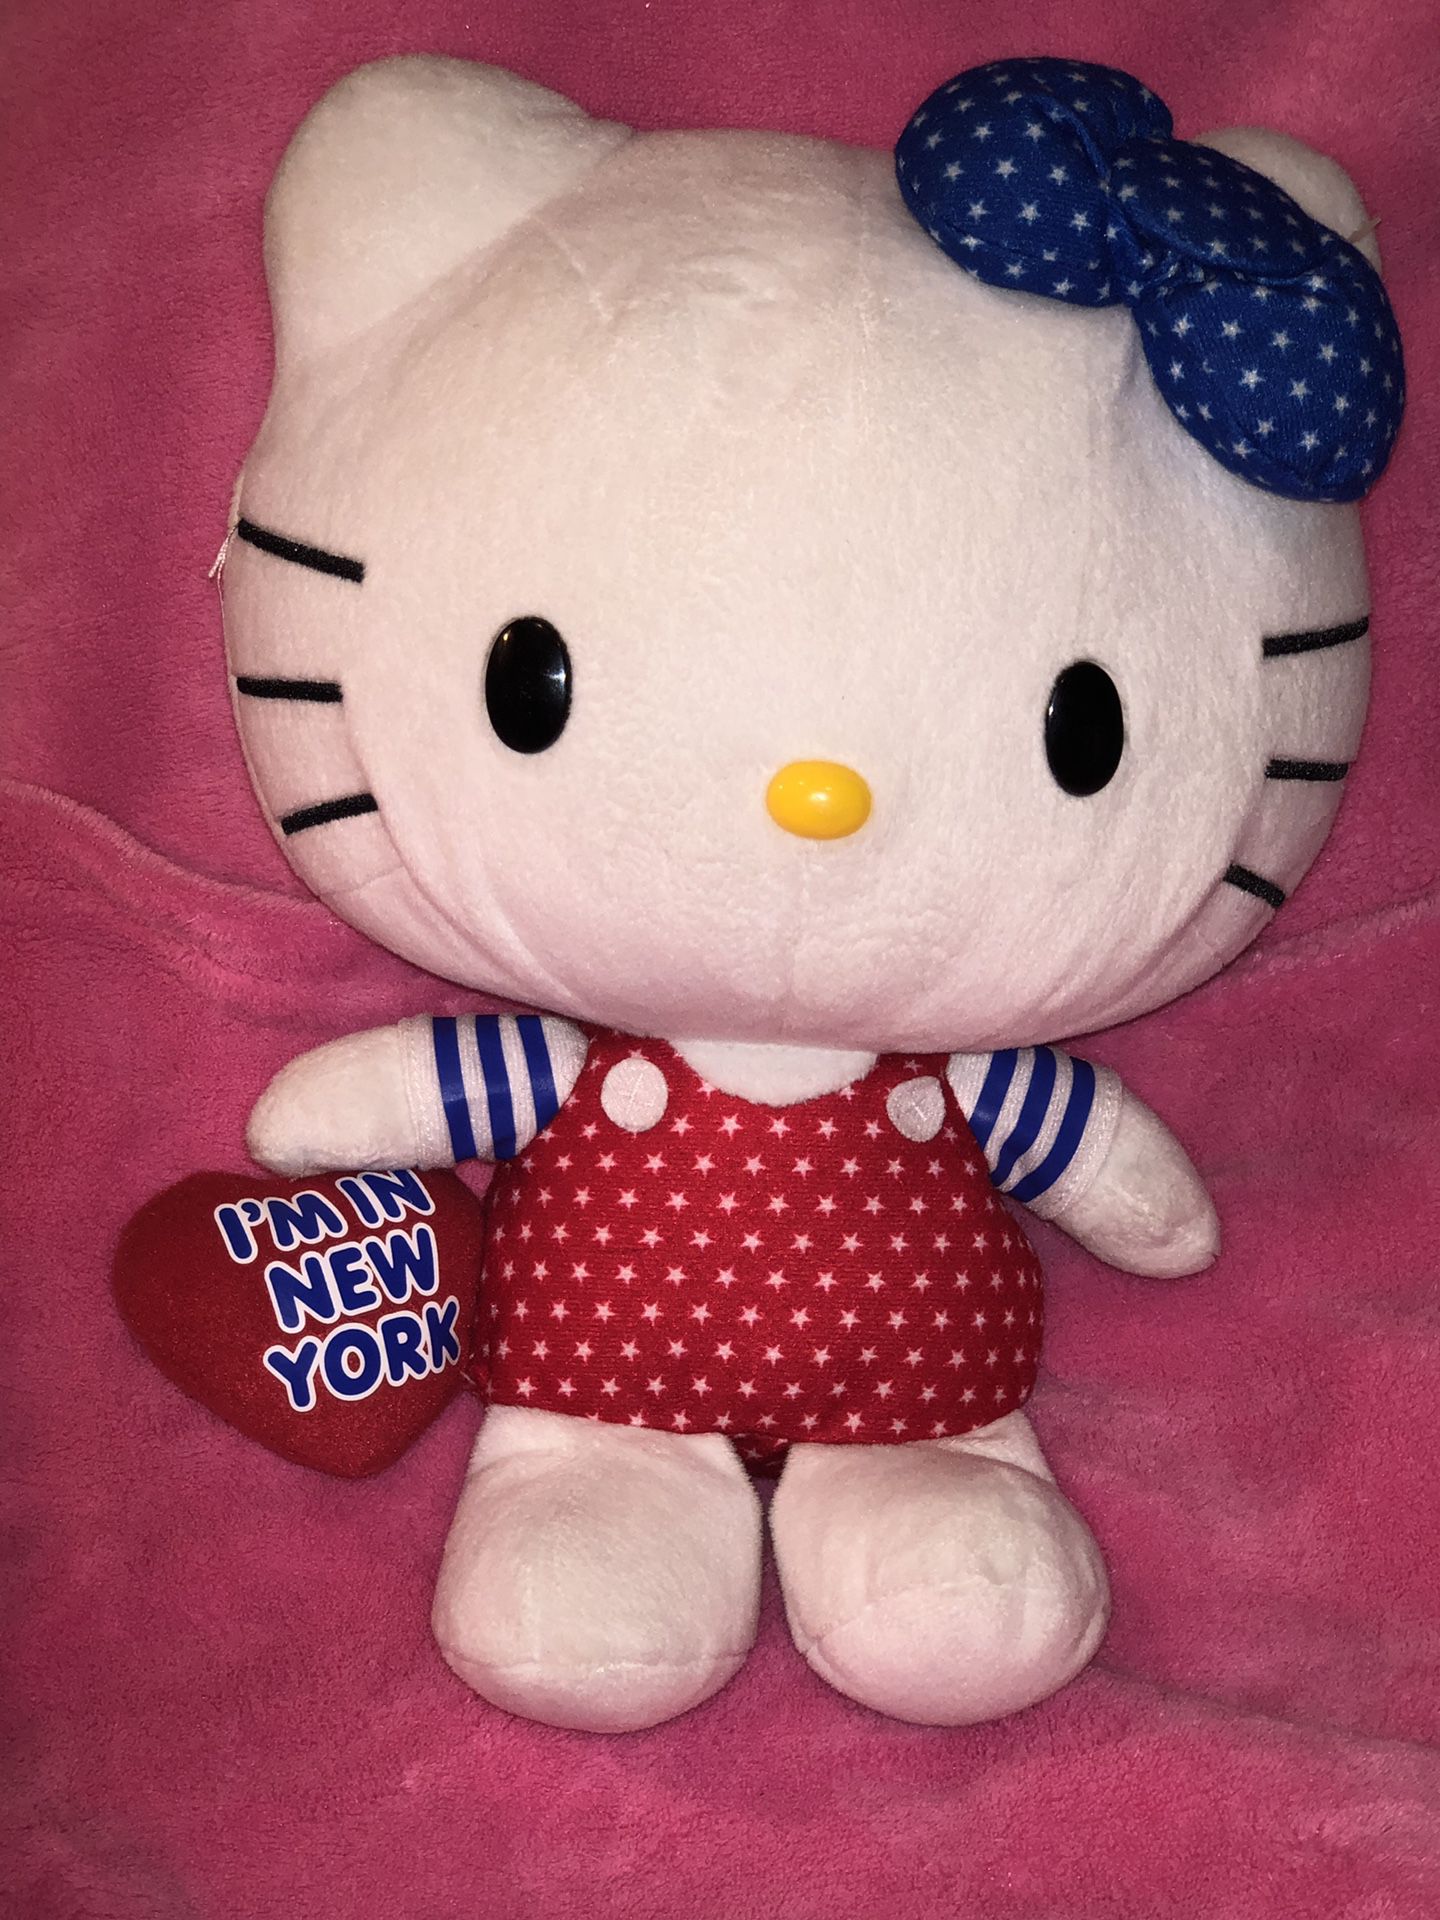 Large 11” Hello Kitty New York plush doll wearing star overalls and matching star bow